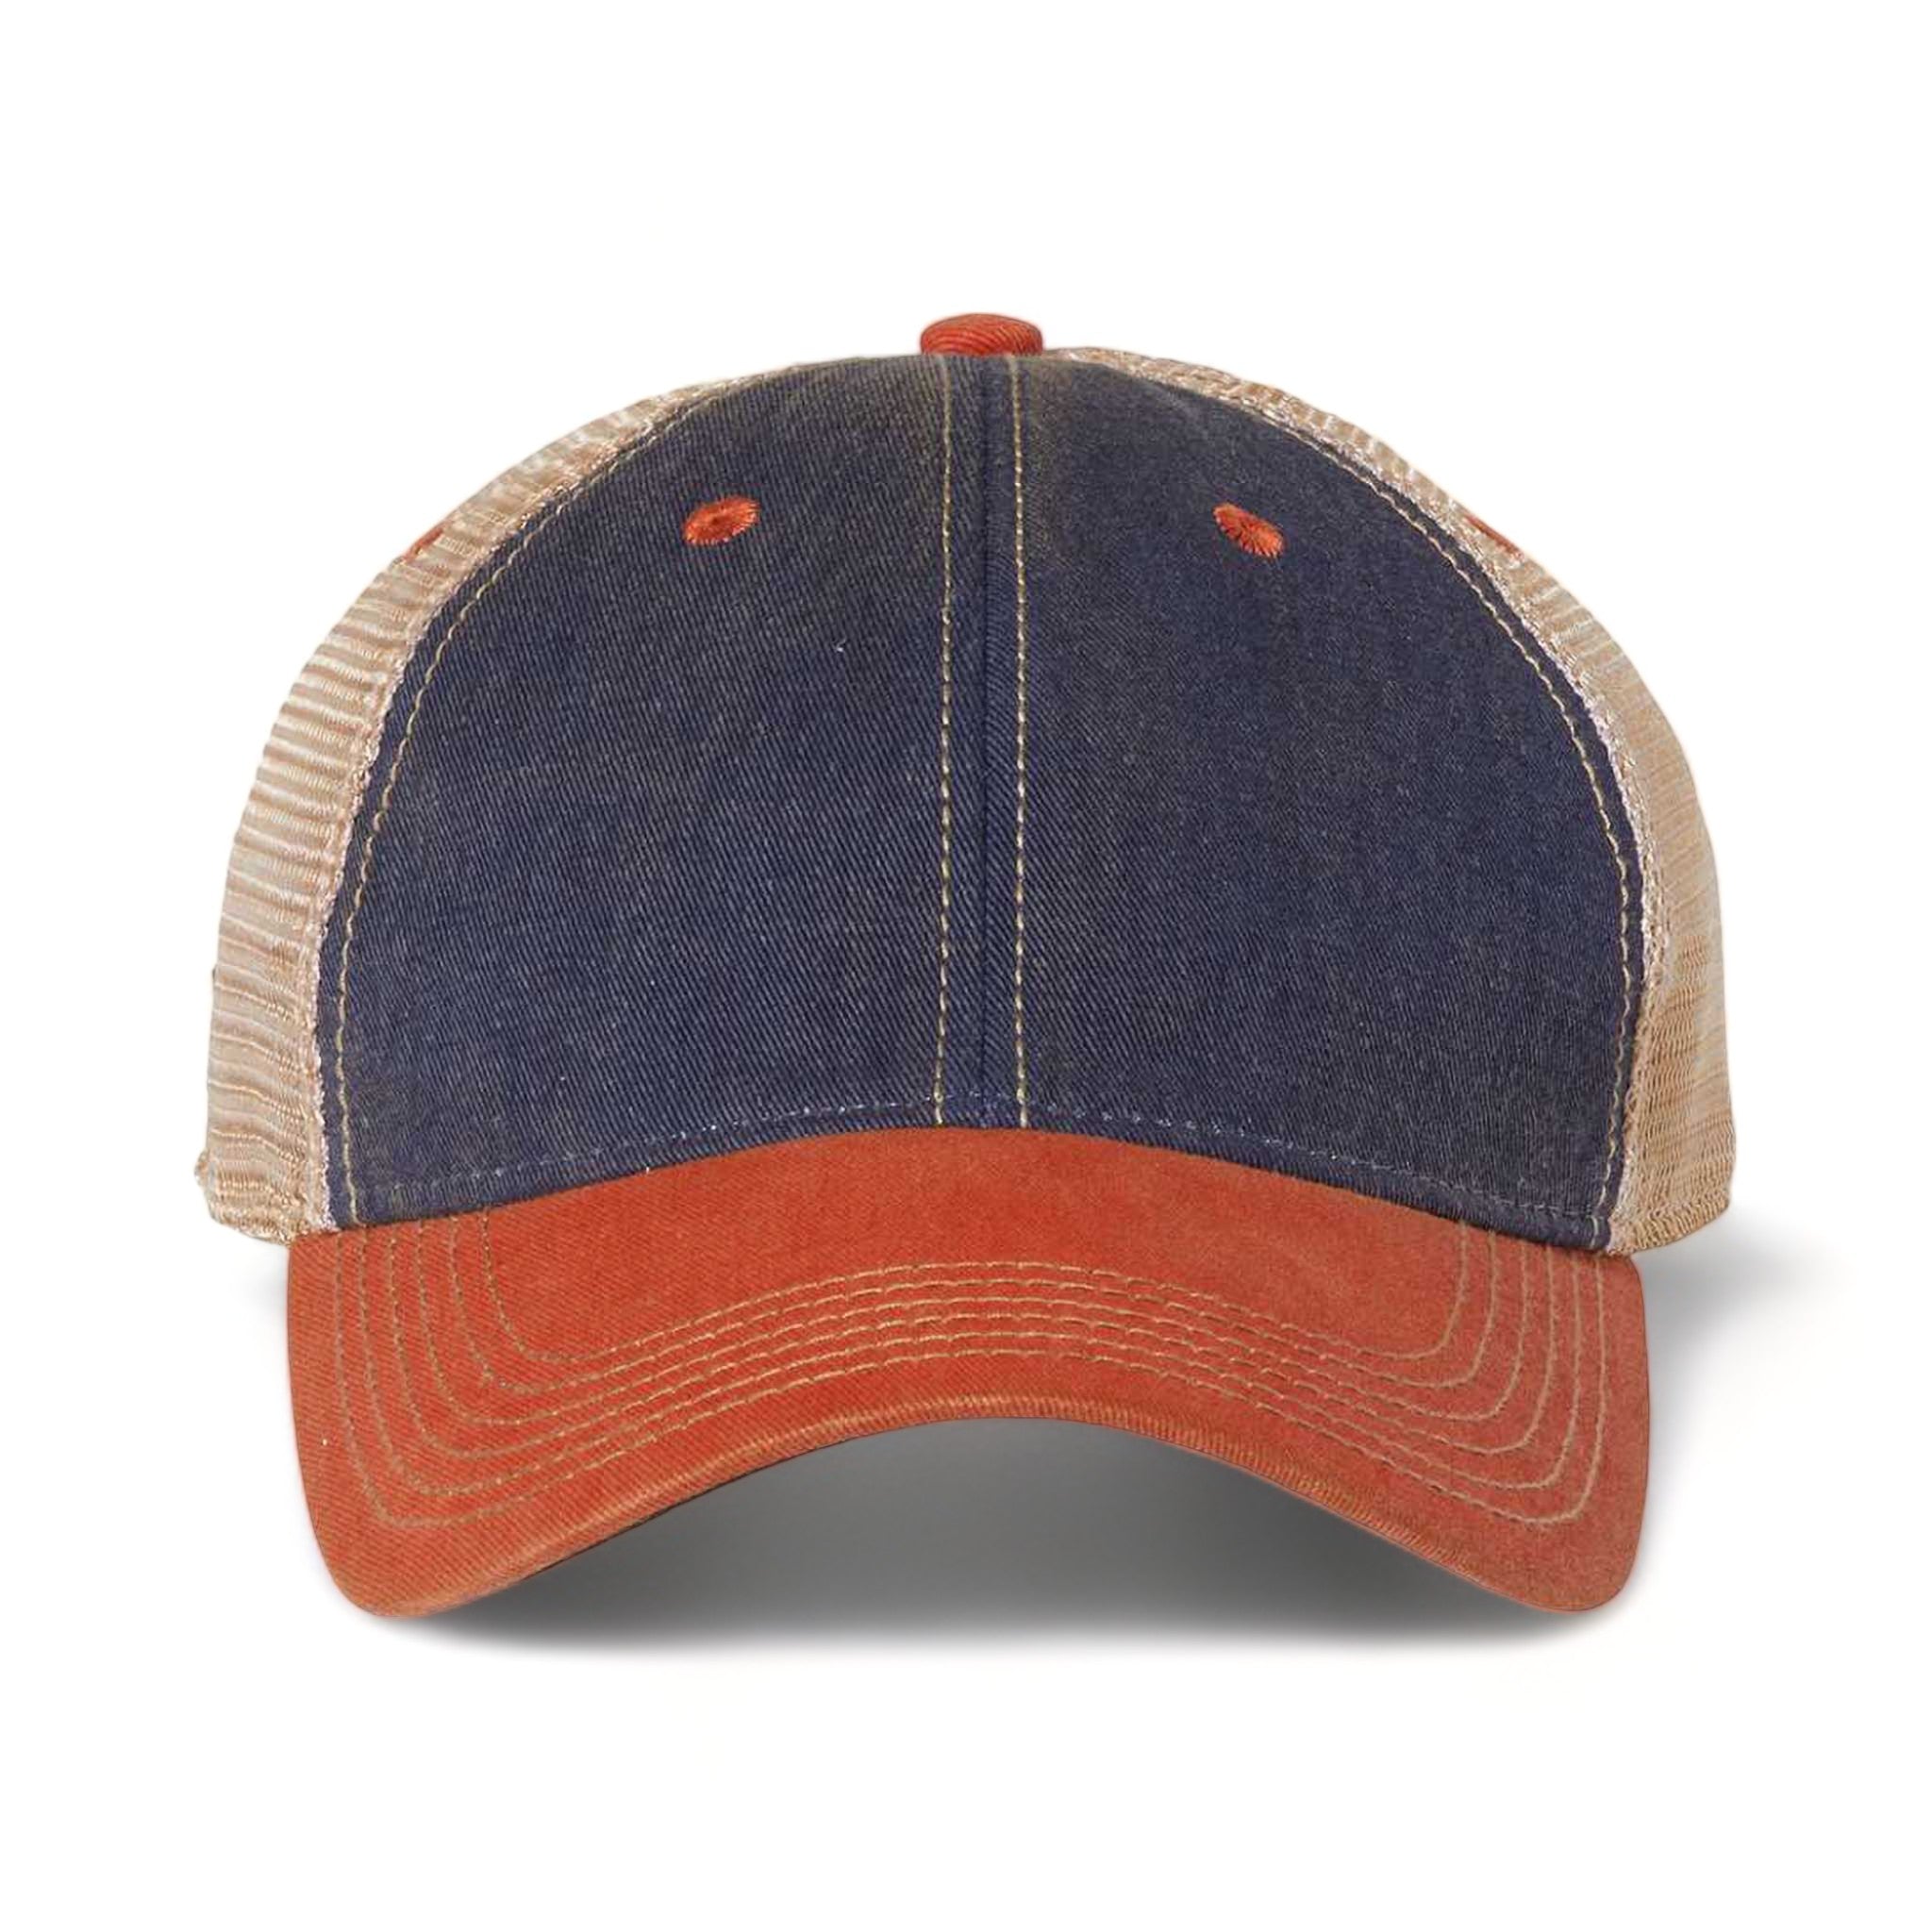 Front view of LEGACY OFA custom hat in navy, orange and khaki